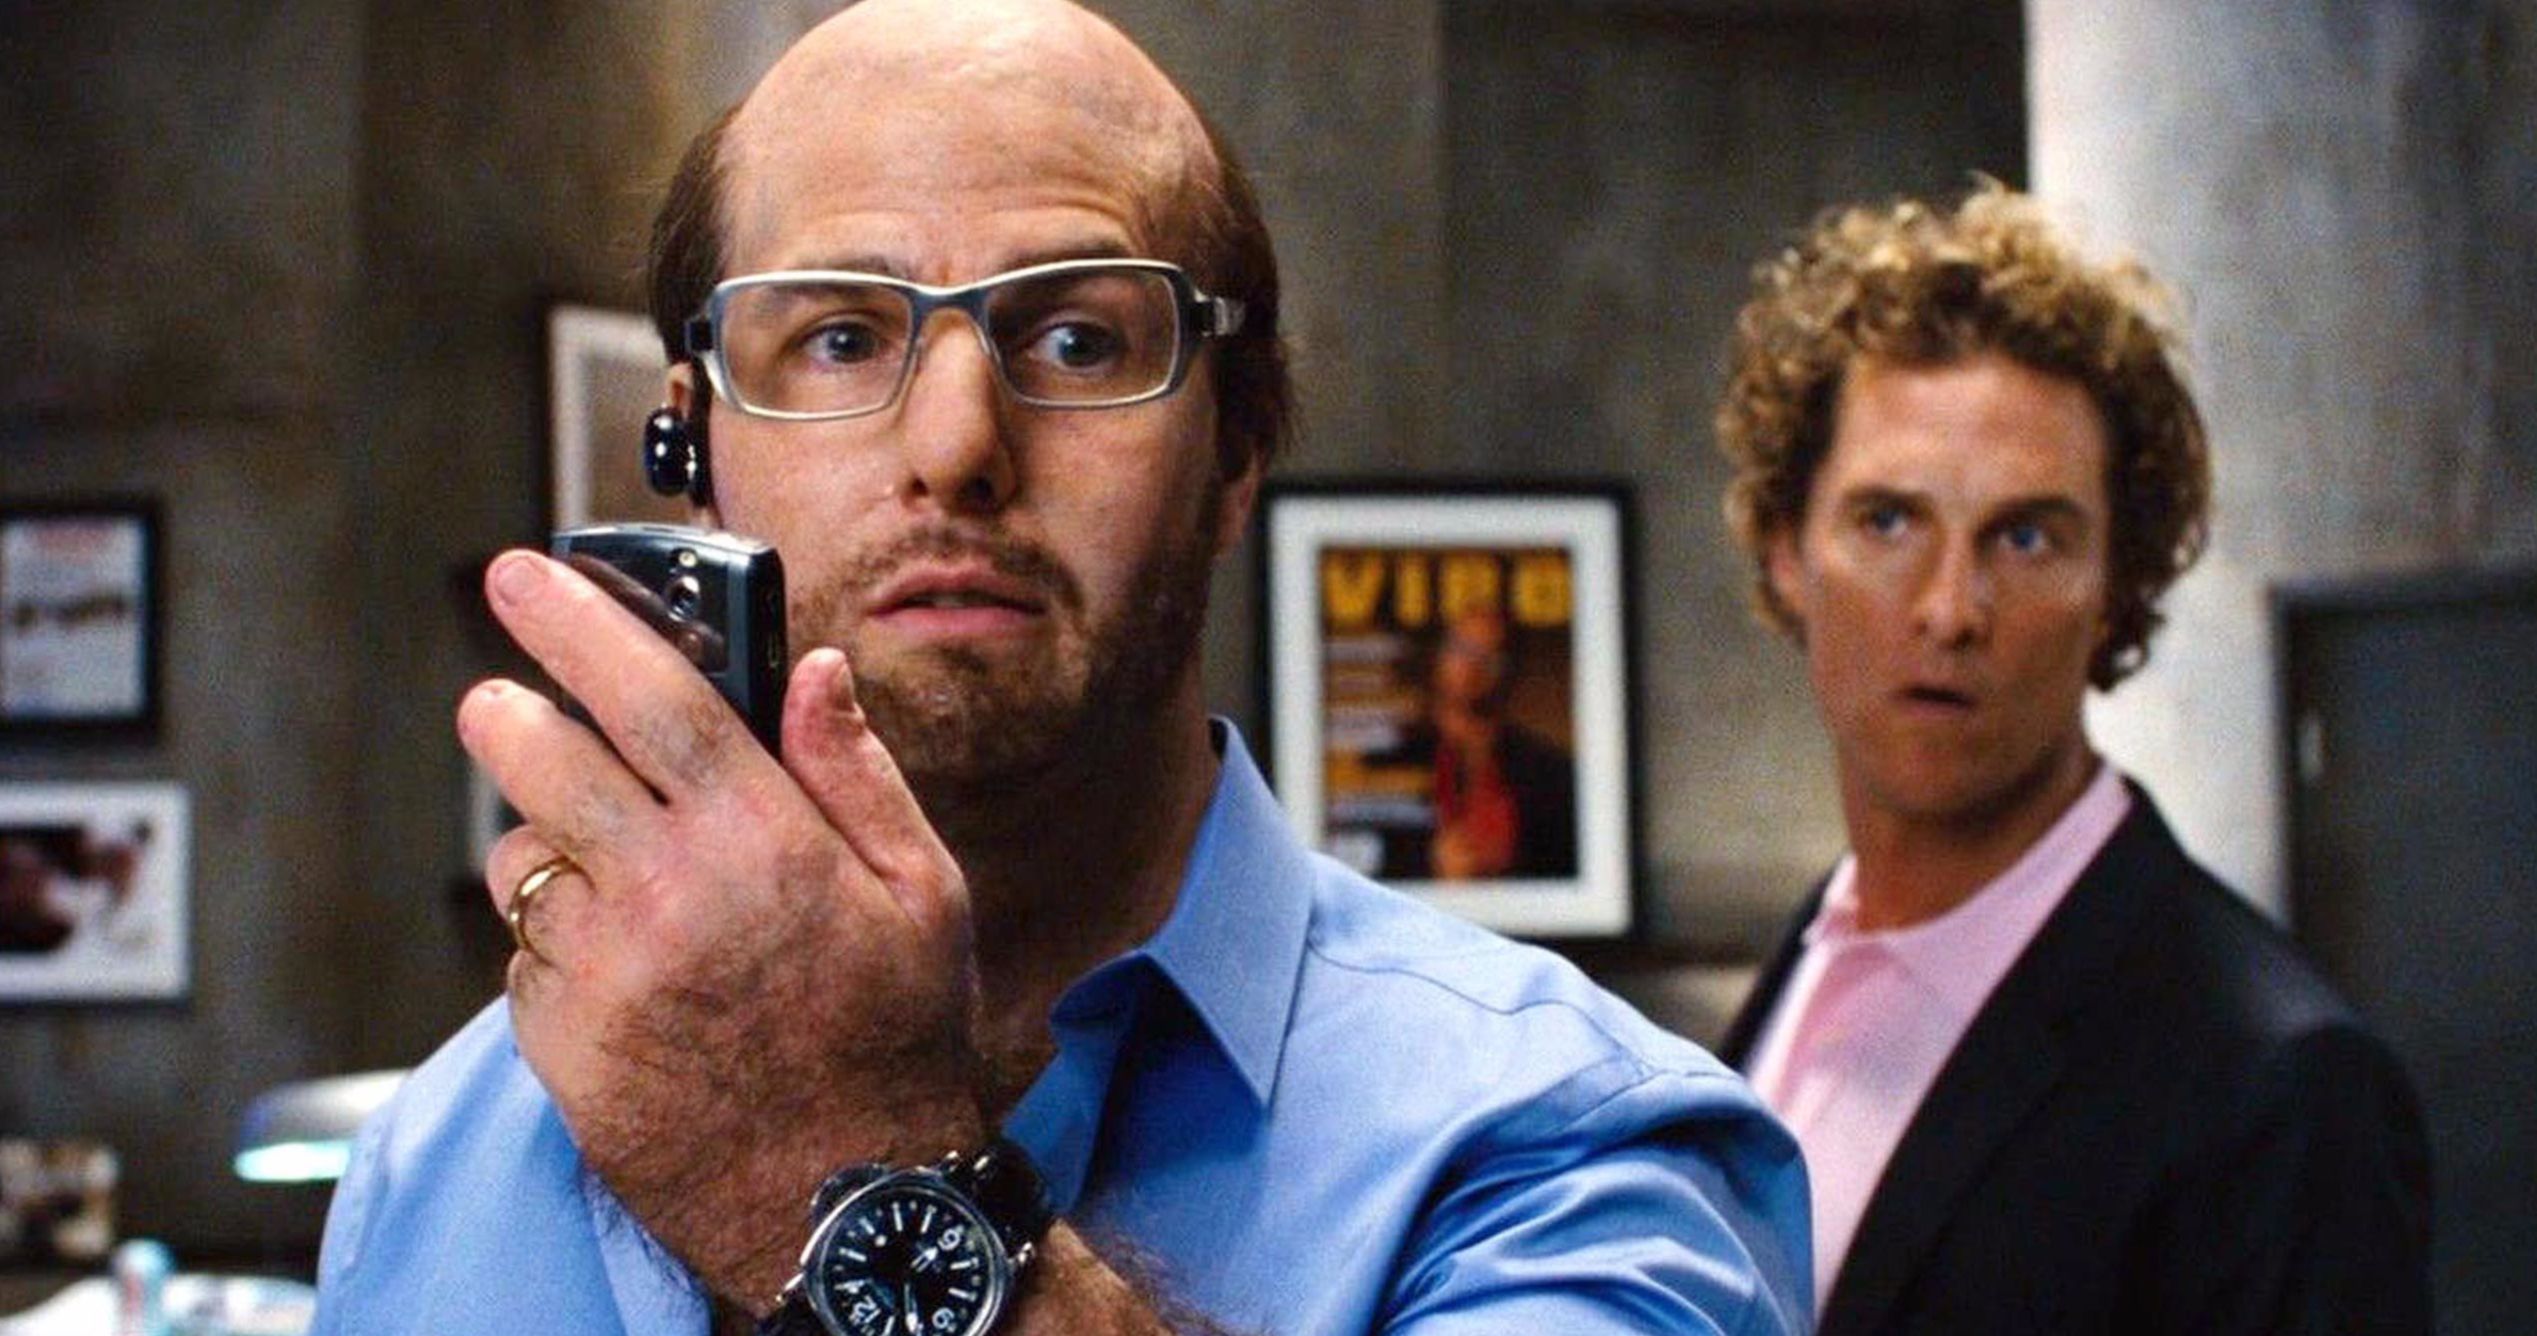 Les Grossman Remembered: Tom Cruise Revisits Tropic Thunder Character at Comic-Con